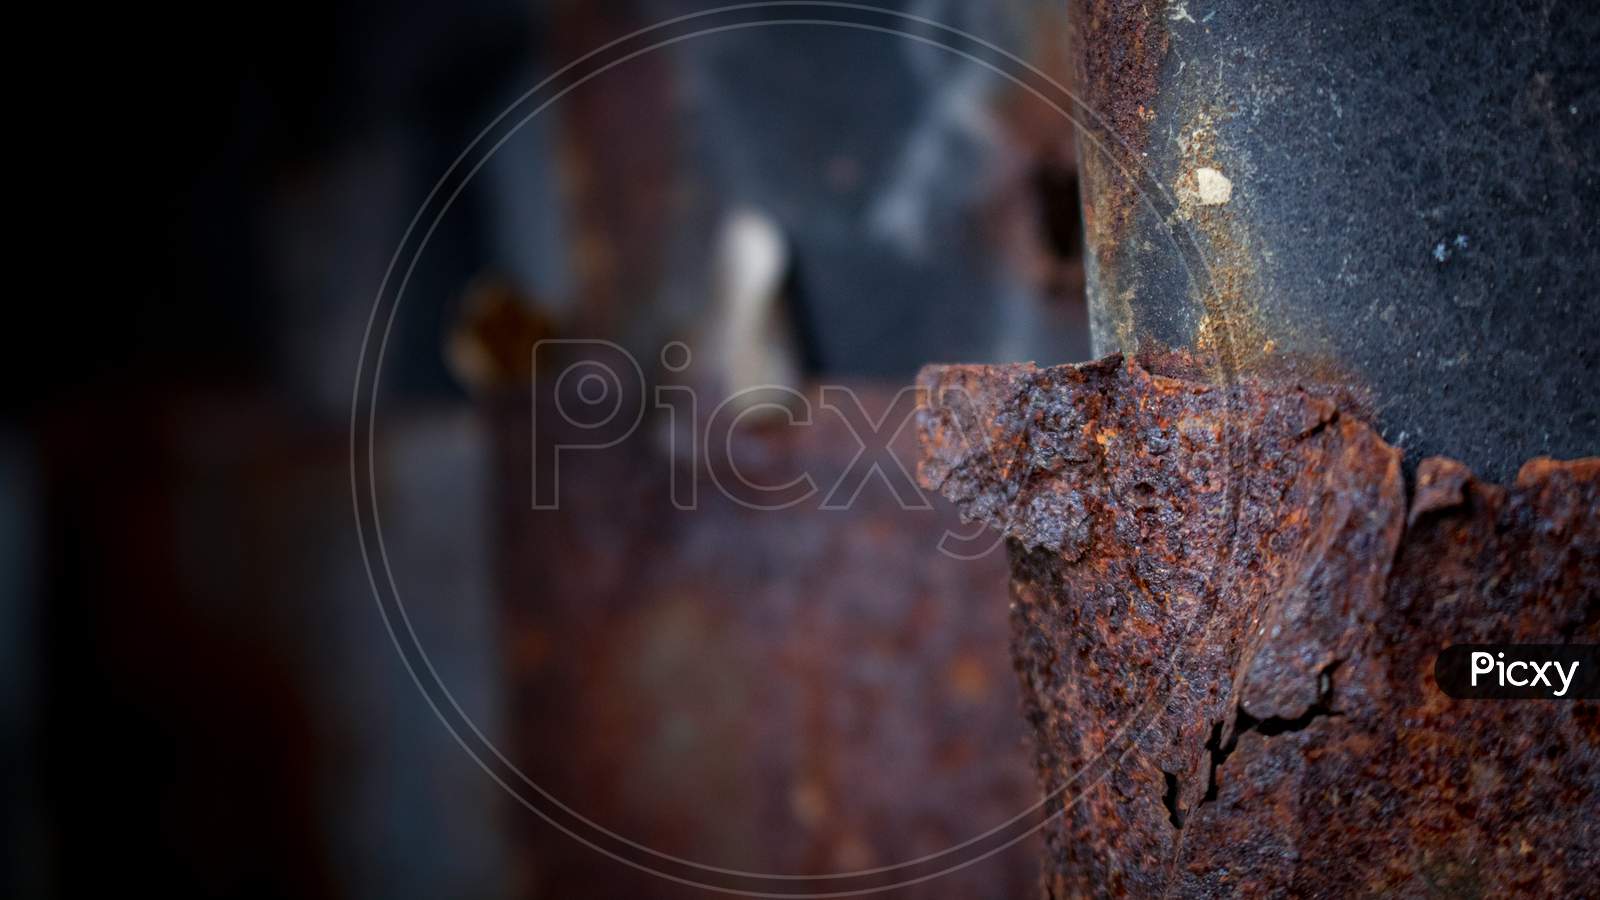 Old Corrugated Iron Sheet Of Brown Color With Numerous Traces Of Rust, Texture Background.